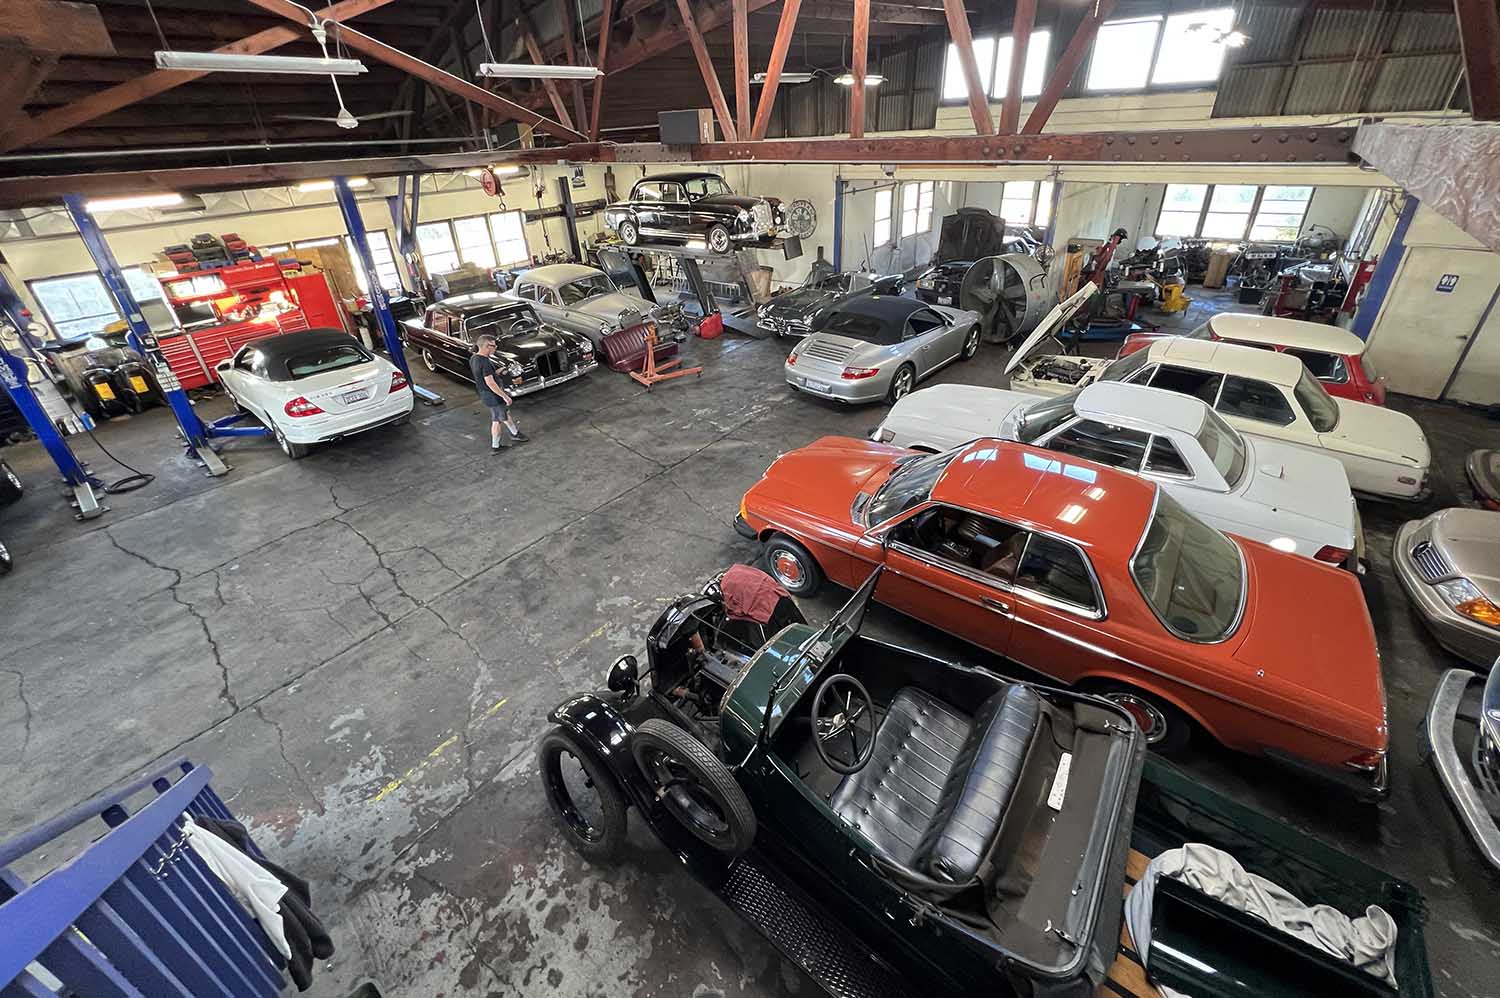 A variety of classic cars sits in an auto-repair shop